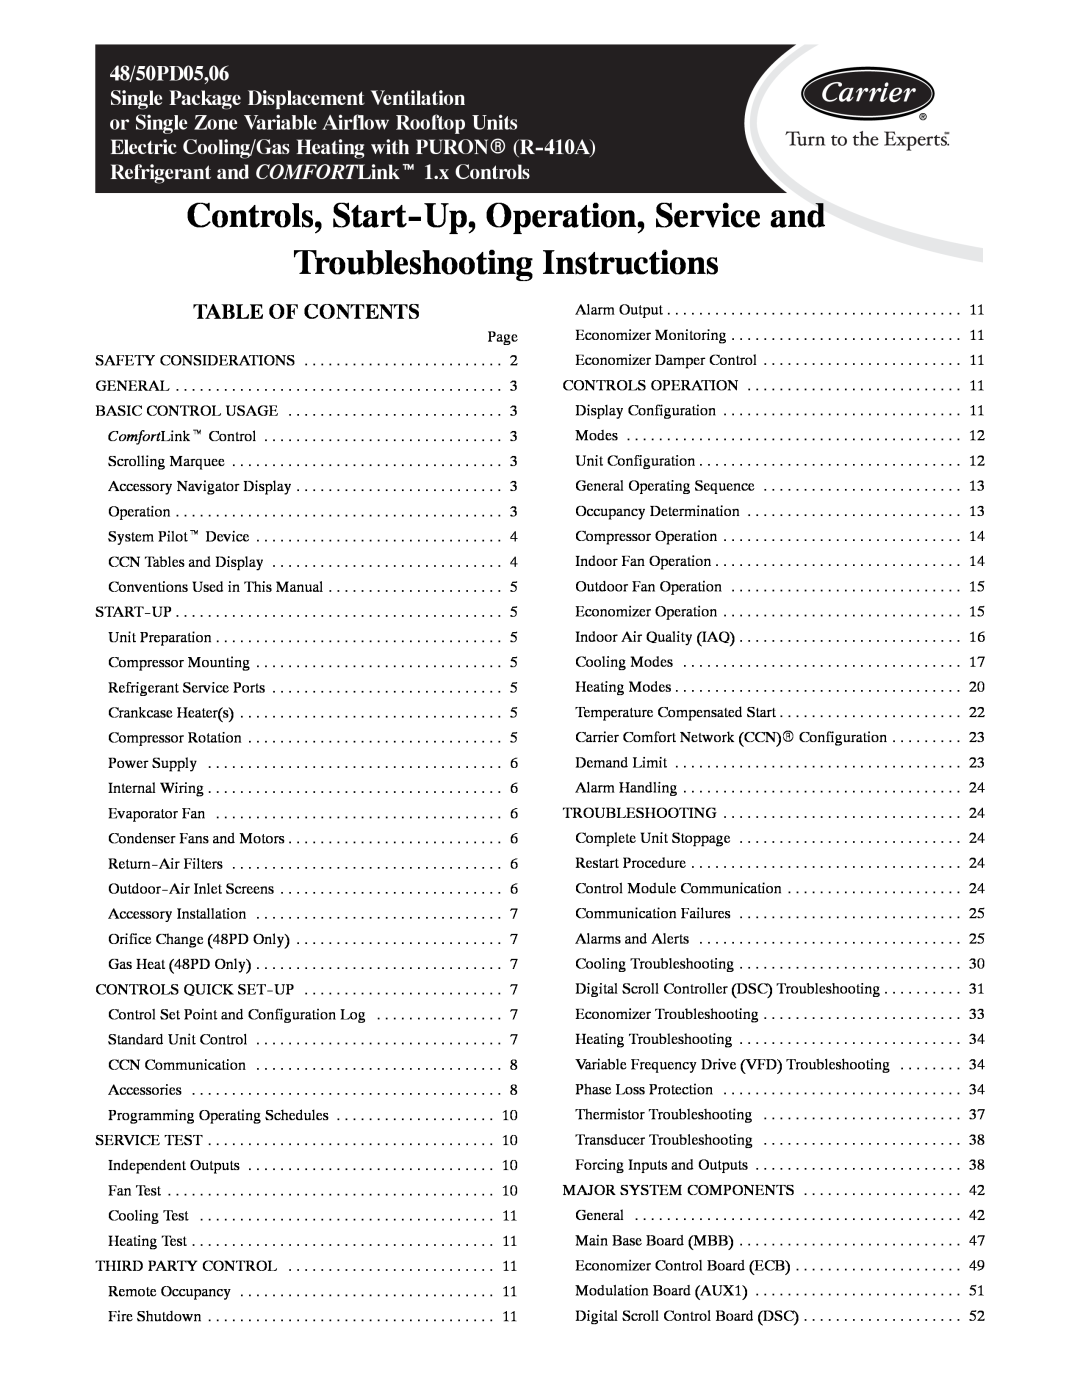 Carrier 48/50PD05 manual Table Of Contents, Controls, Start-Up,Operation, Service and, Troubleshooting Instructions 